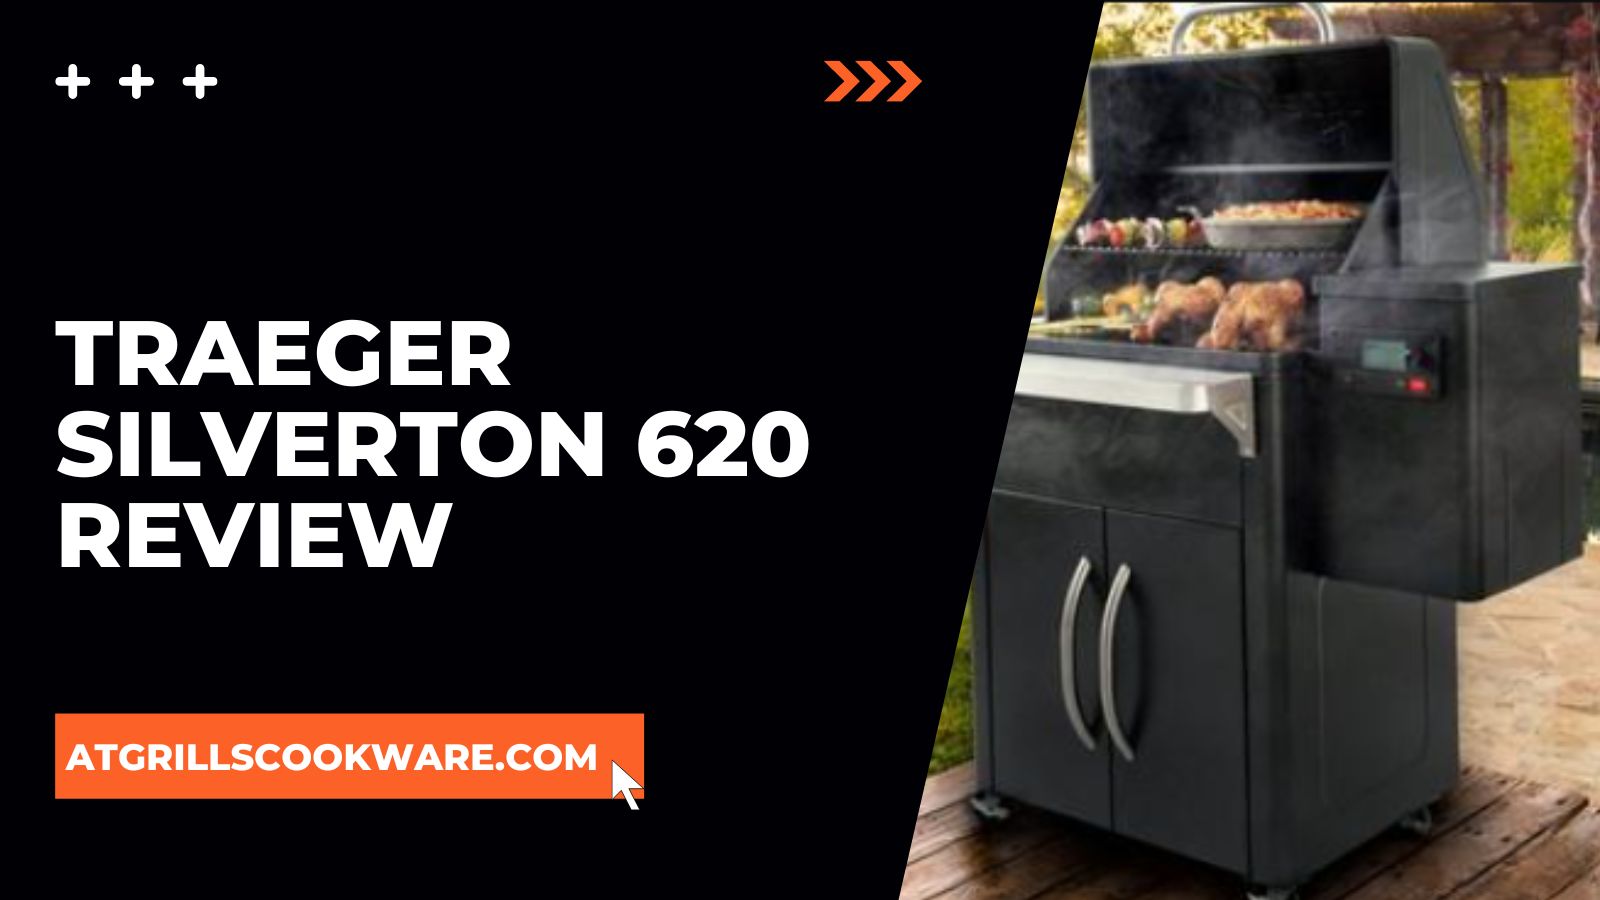 Traeger Silverton 620 Review: Is it Worth the Hype?